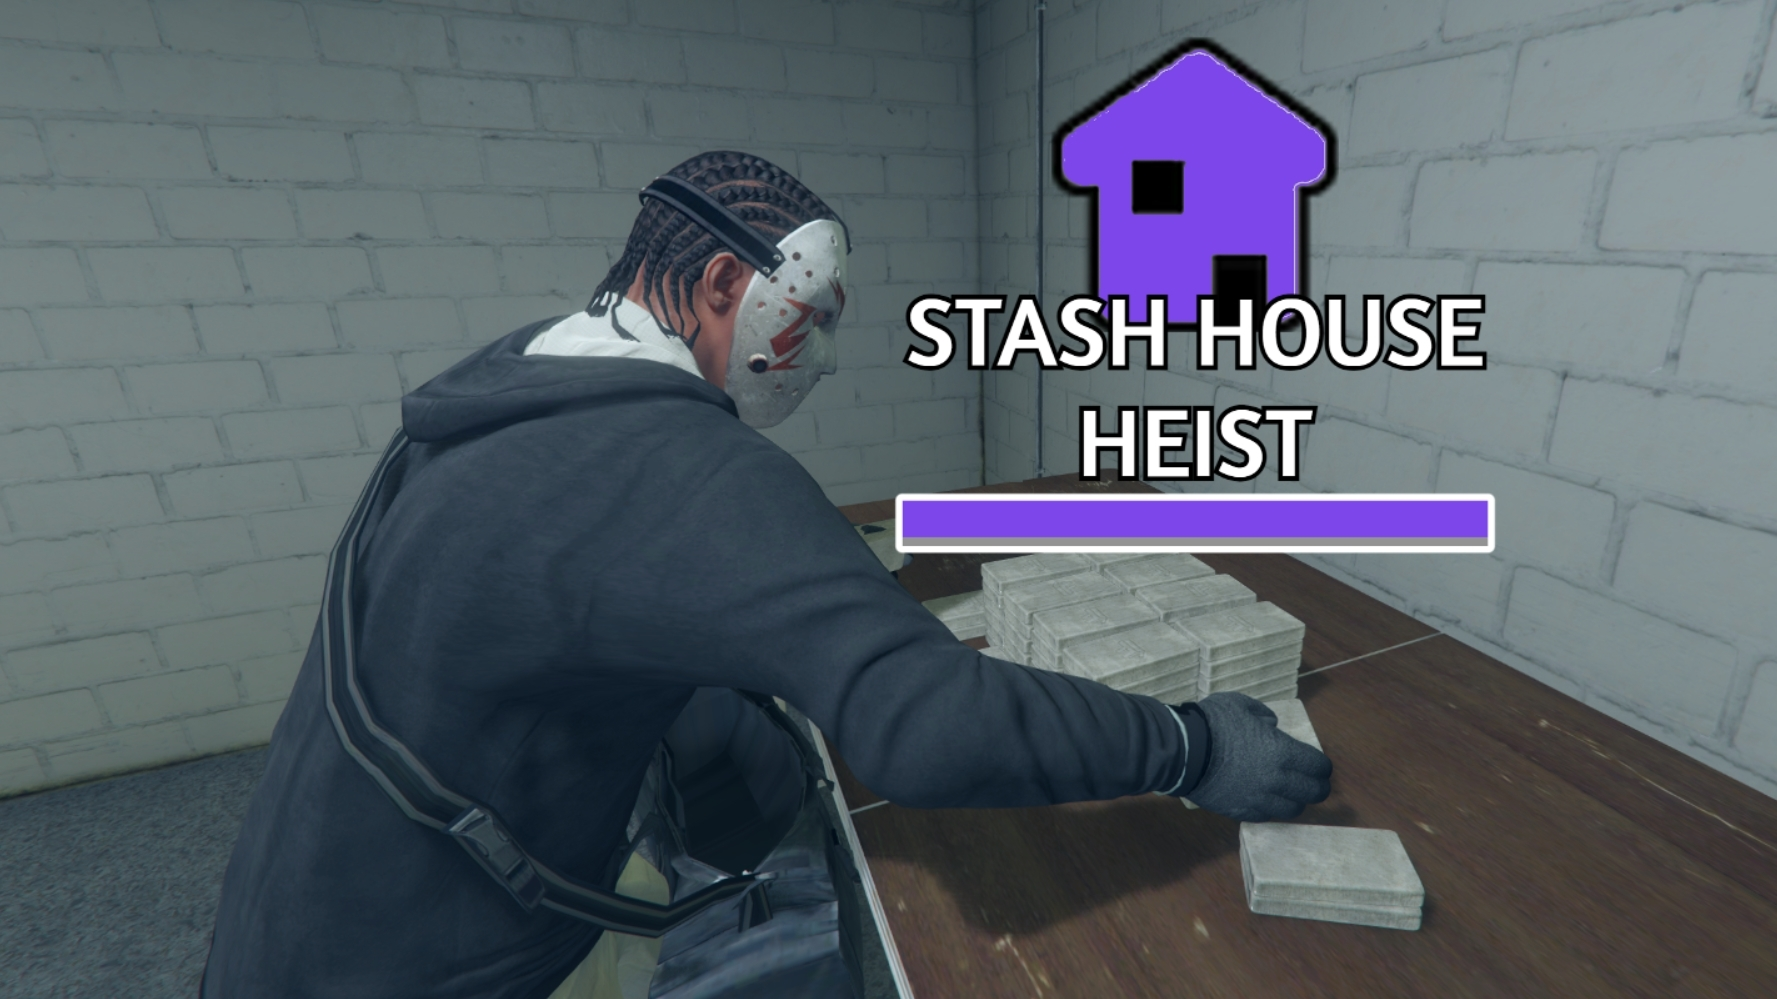 I don't think I'm doing the stash house today : r/gtaonline